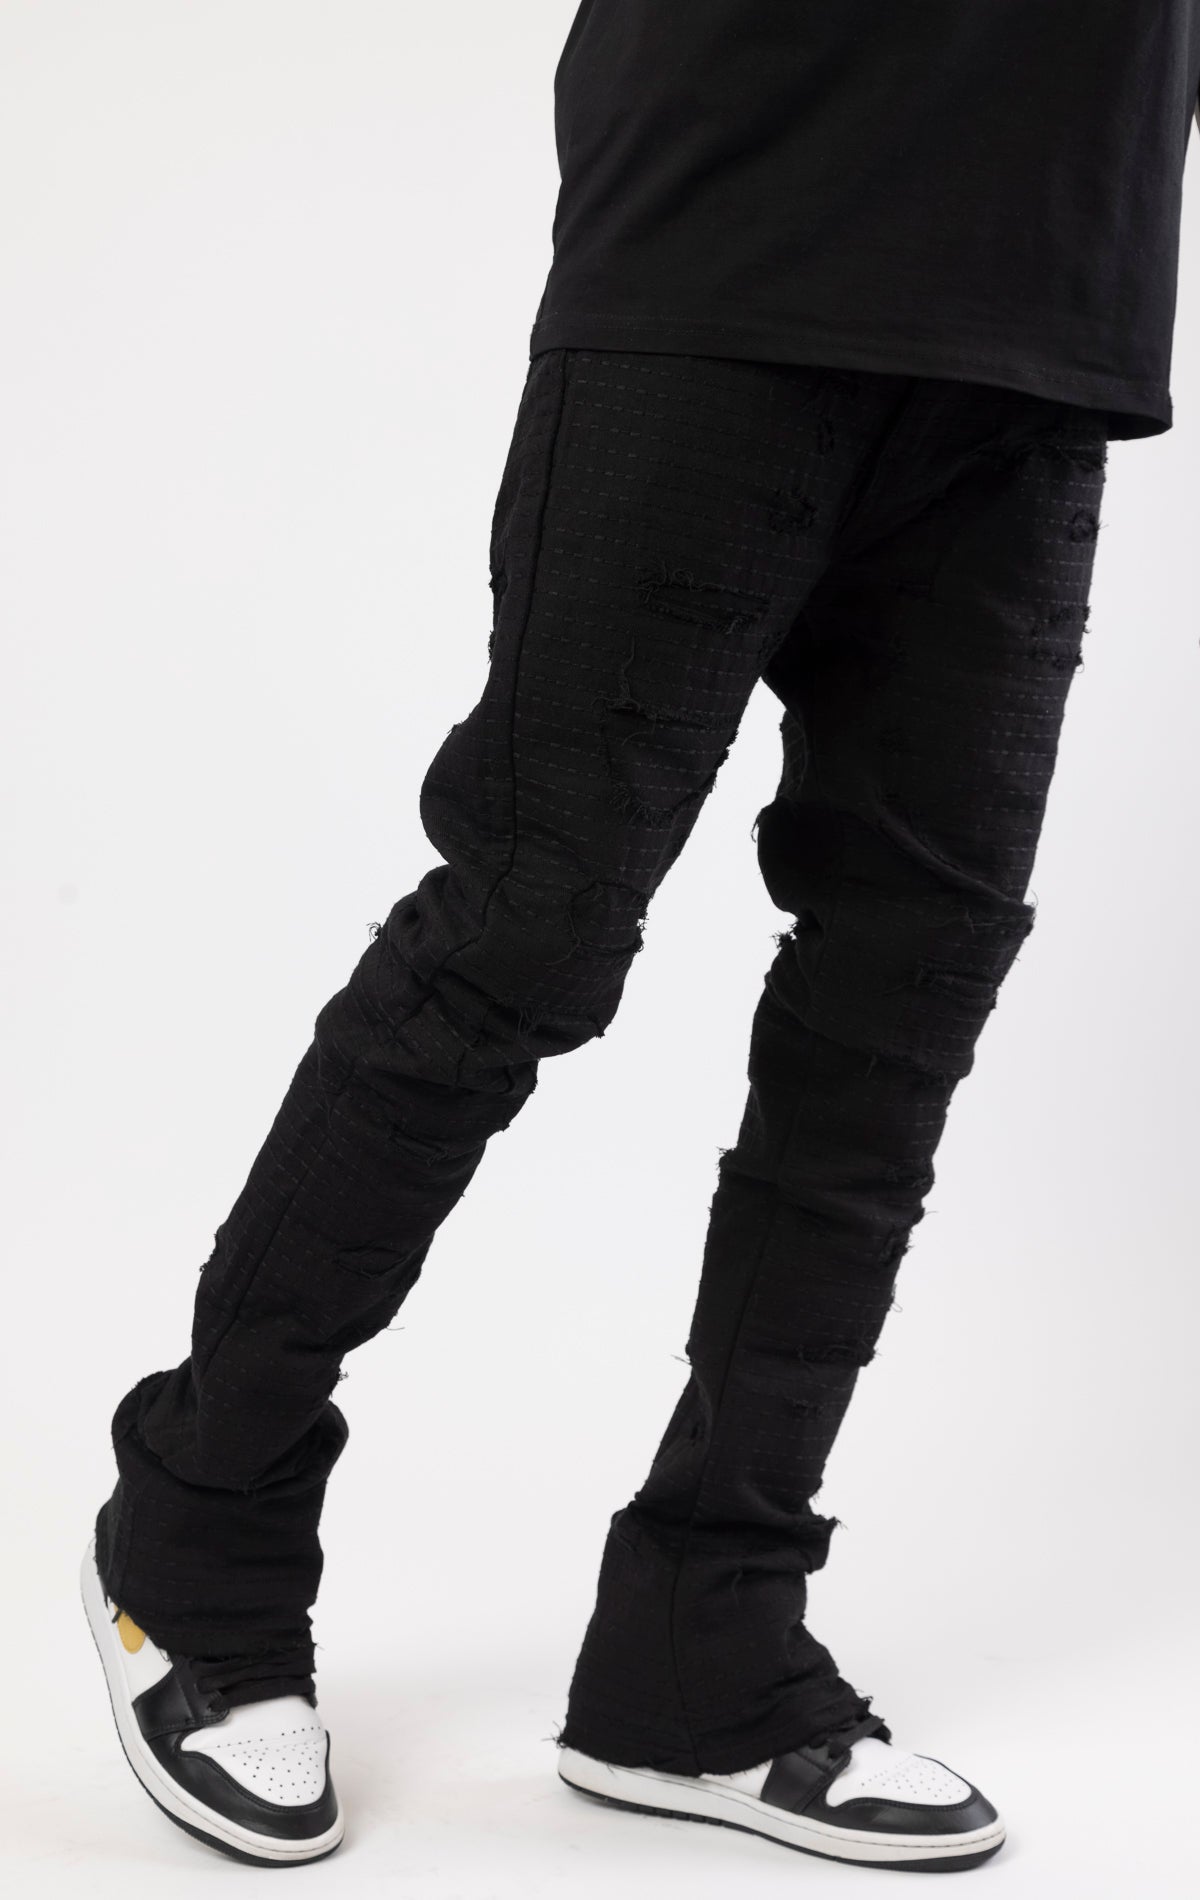 Jet black distressed denim jeans with a ripped and stacked fit.